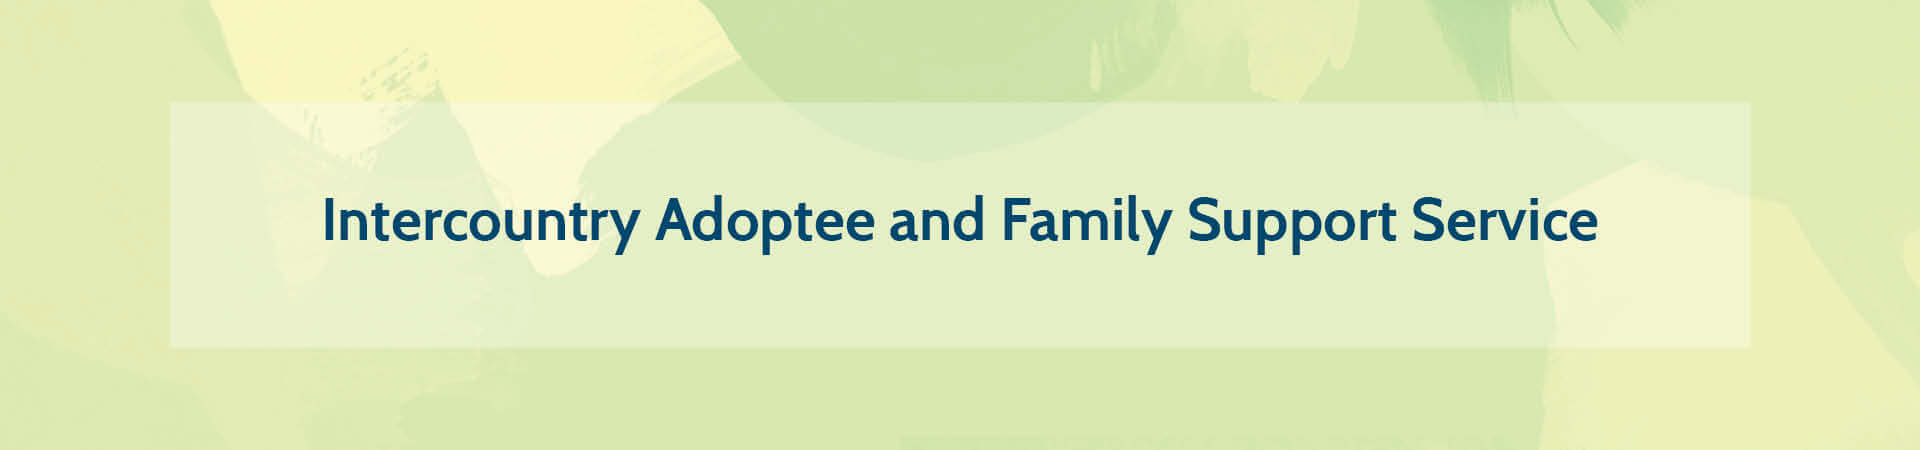 Intercountry Adoptee and Family Support Service